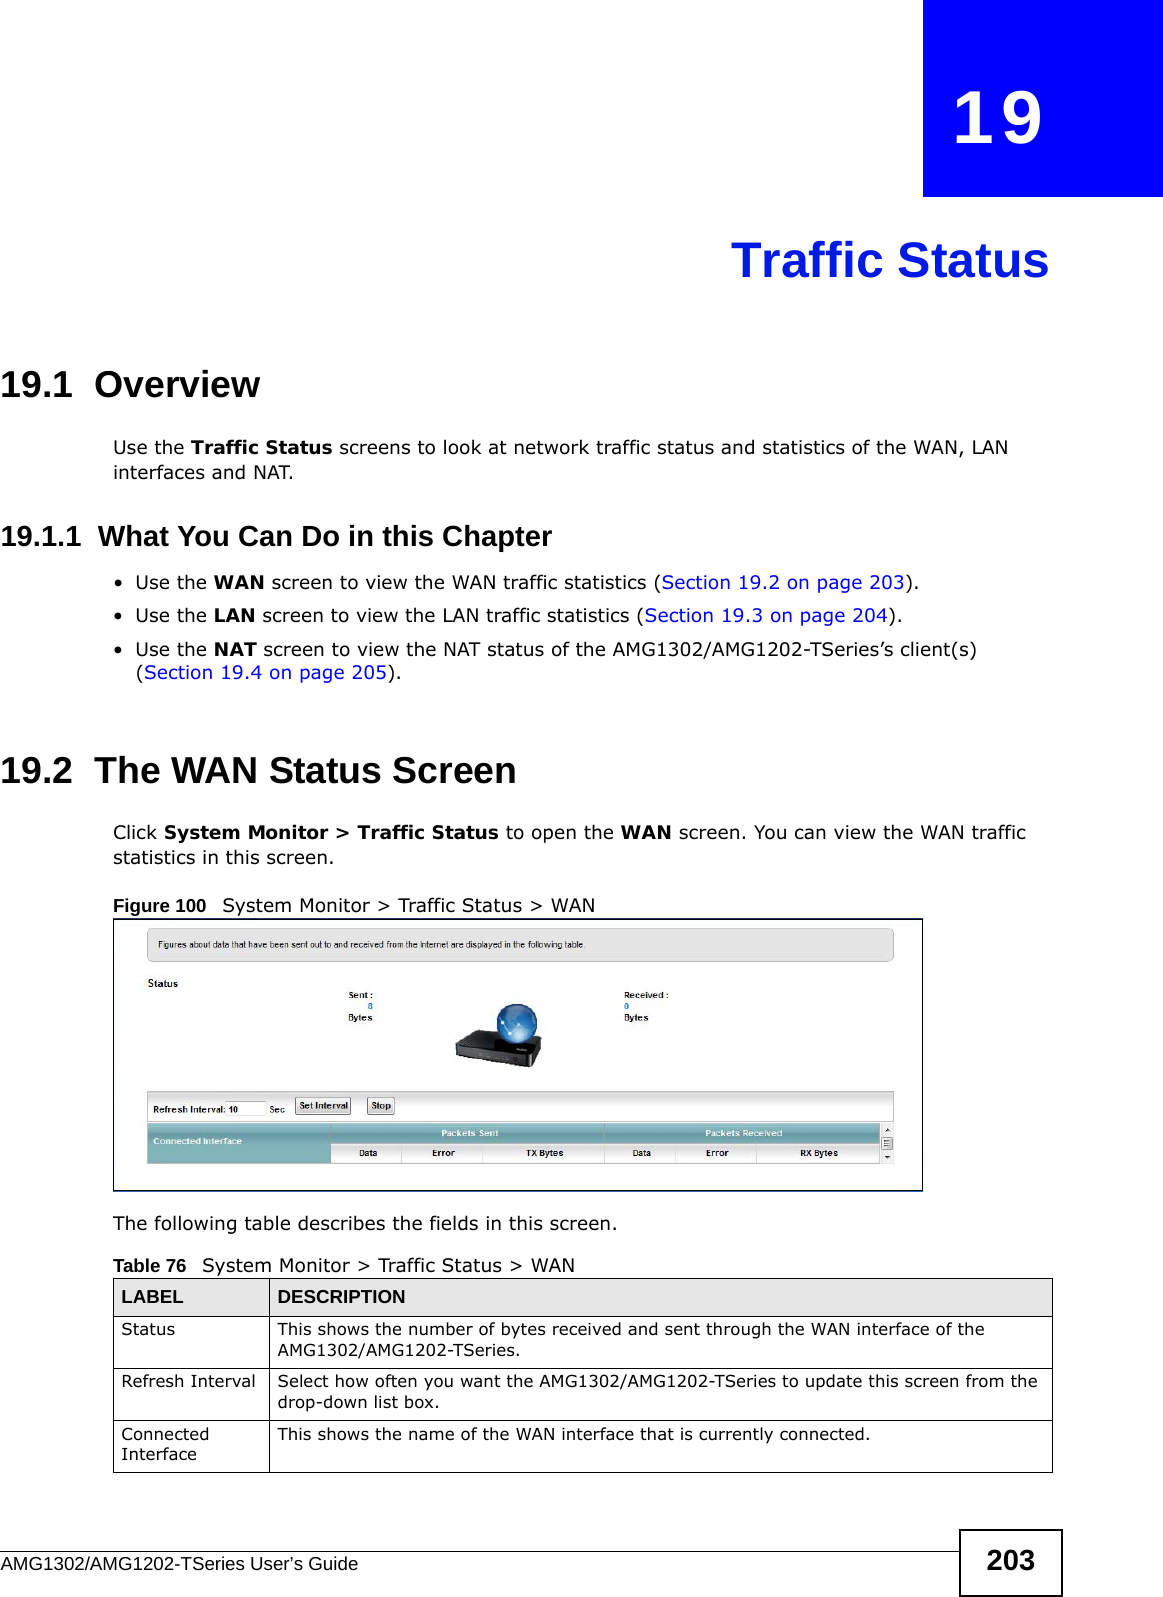 AMG1302/AMG1202-TSeries User’s Guide 203CHAPTER   19Traffic Status19.1  OverviewUse the Traffic Status screens to look at network traffic status and statistics of the WAN, LAN interfaces and NAT. 19.1.1  What You Can Do in this Chapter•Use the WAN screen to view the WAN traffic statistics (Section 19.2 on page 203).•Use the LAN screen to view the LAN traffic statistics (Section 19.3 on page 204).•Use the NAT screen to view the NAT status of the AMG1302/AMG1202-TSeries’s client(s) (Section 19.4 on page 205).19.2  The WAN Status Screen Click System Monitor &gt; Traffic Status to open the WAN screen. You can view the WAN traffic statistics in this screen.Figure 100   System Monitor &gt; Traffic Status &gt; WANThe following table describes the fields in this screen.   Table 76   System Monitor &gt; Traffic Status &gt; WANLABEL DESCRIPTIONStatus This shows the number of bytes received and sent through the WAN interface of the AMG1302/AMG1202-TSeries.Refresh Interval Select how often you want the AMG1302/AMG1202-TSeries to update this screen from the drop-down list box.Connected Interface This shows the name of the WAN interface that is currently connected.